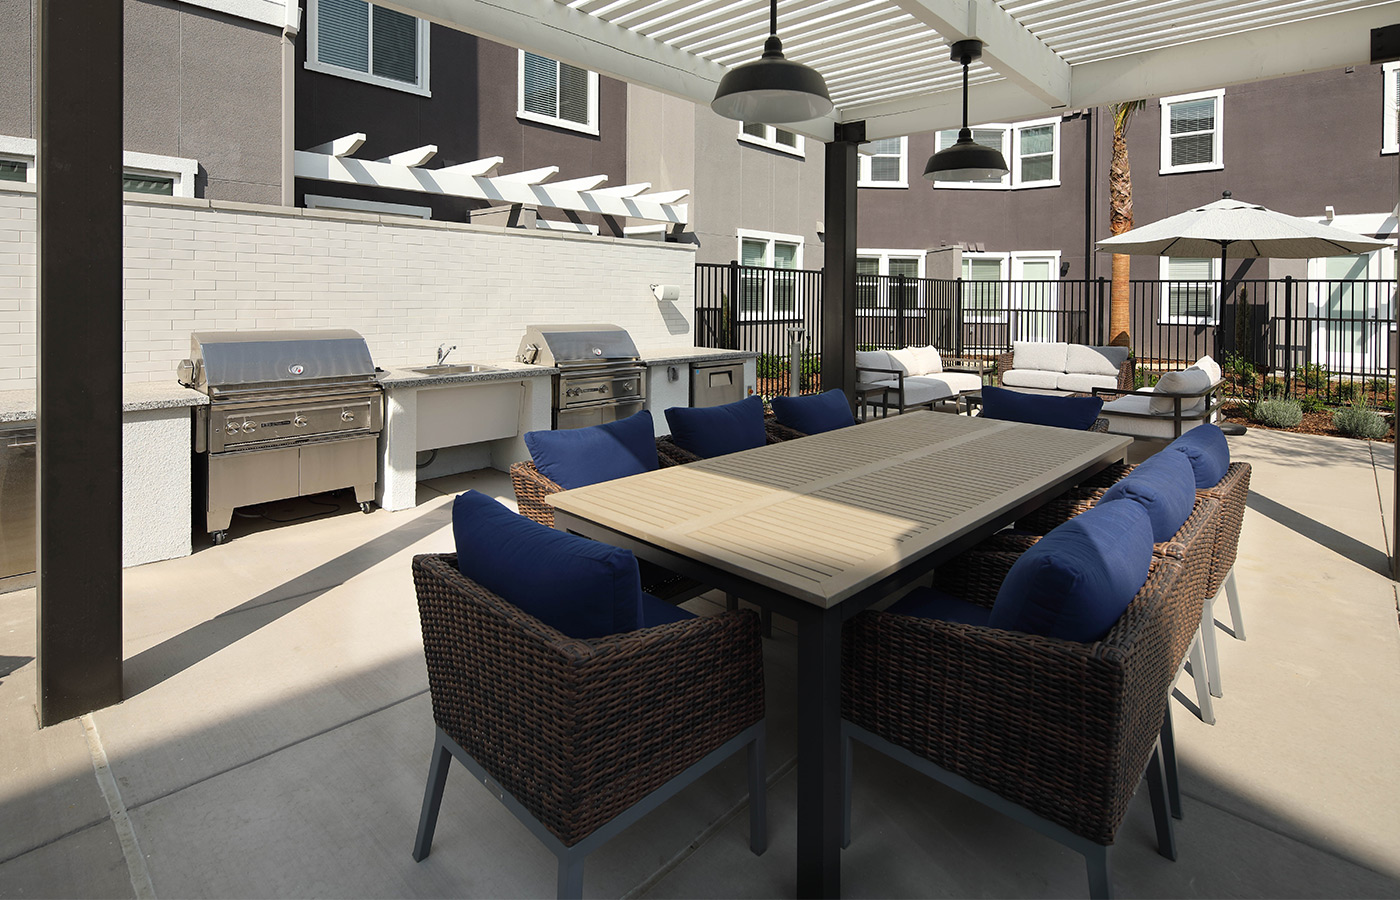 A patio with an outdoor kitchen grilling area.